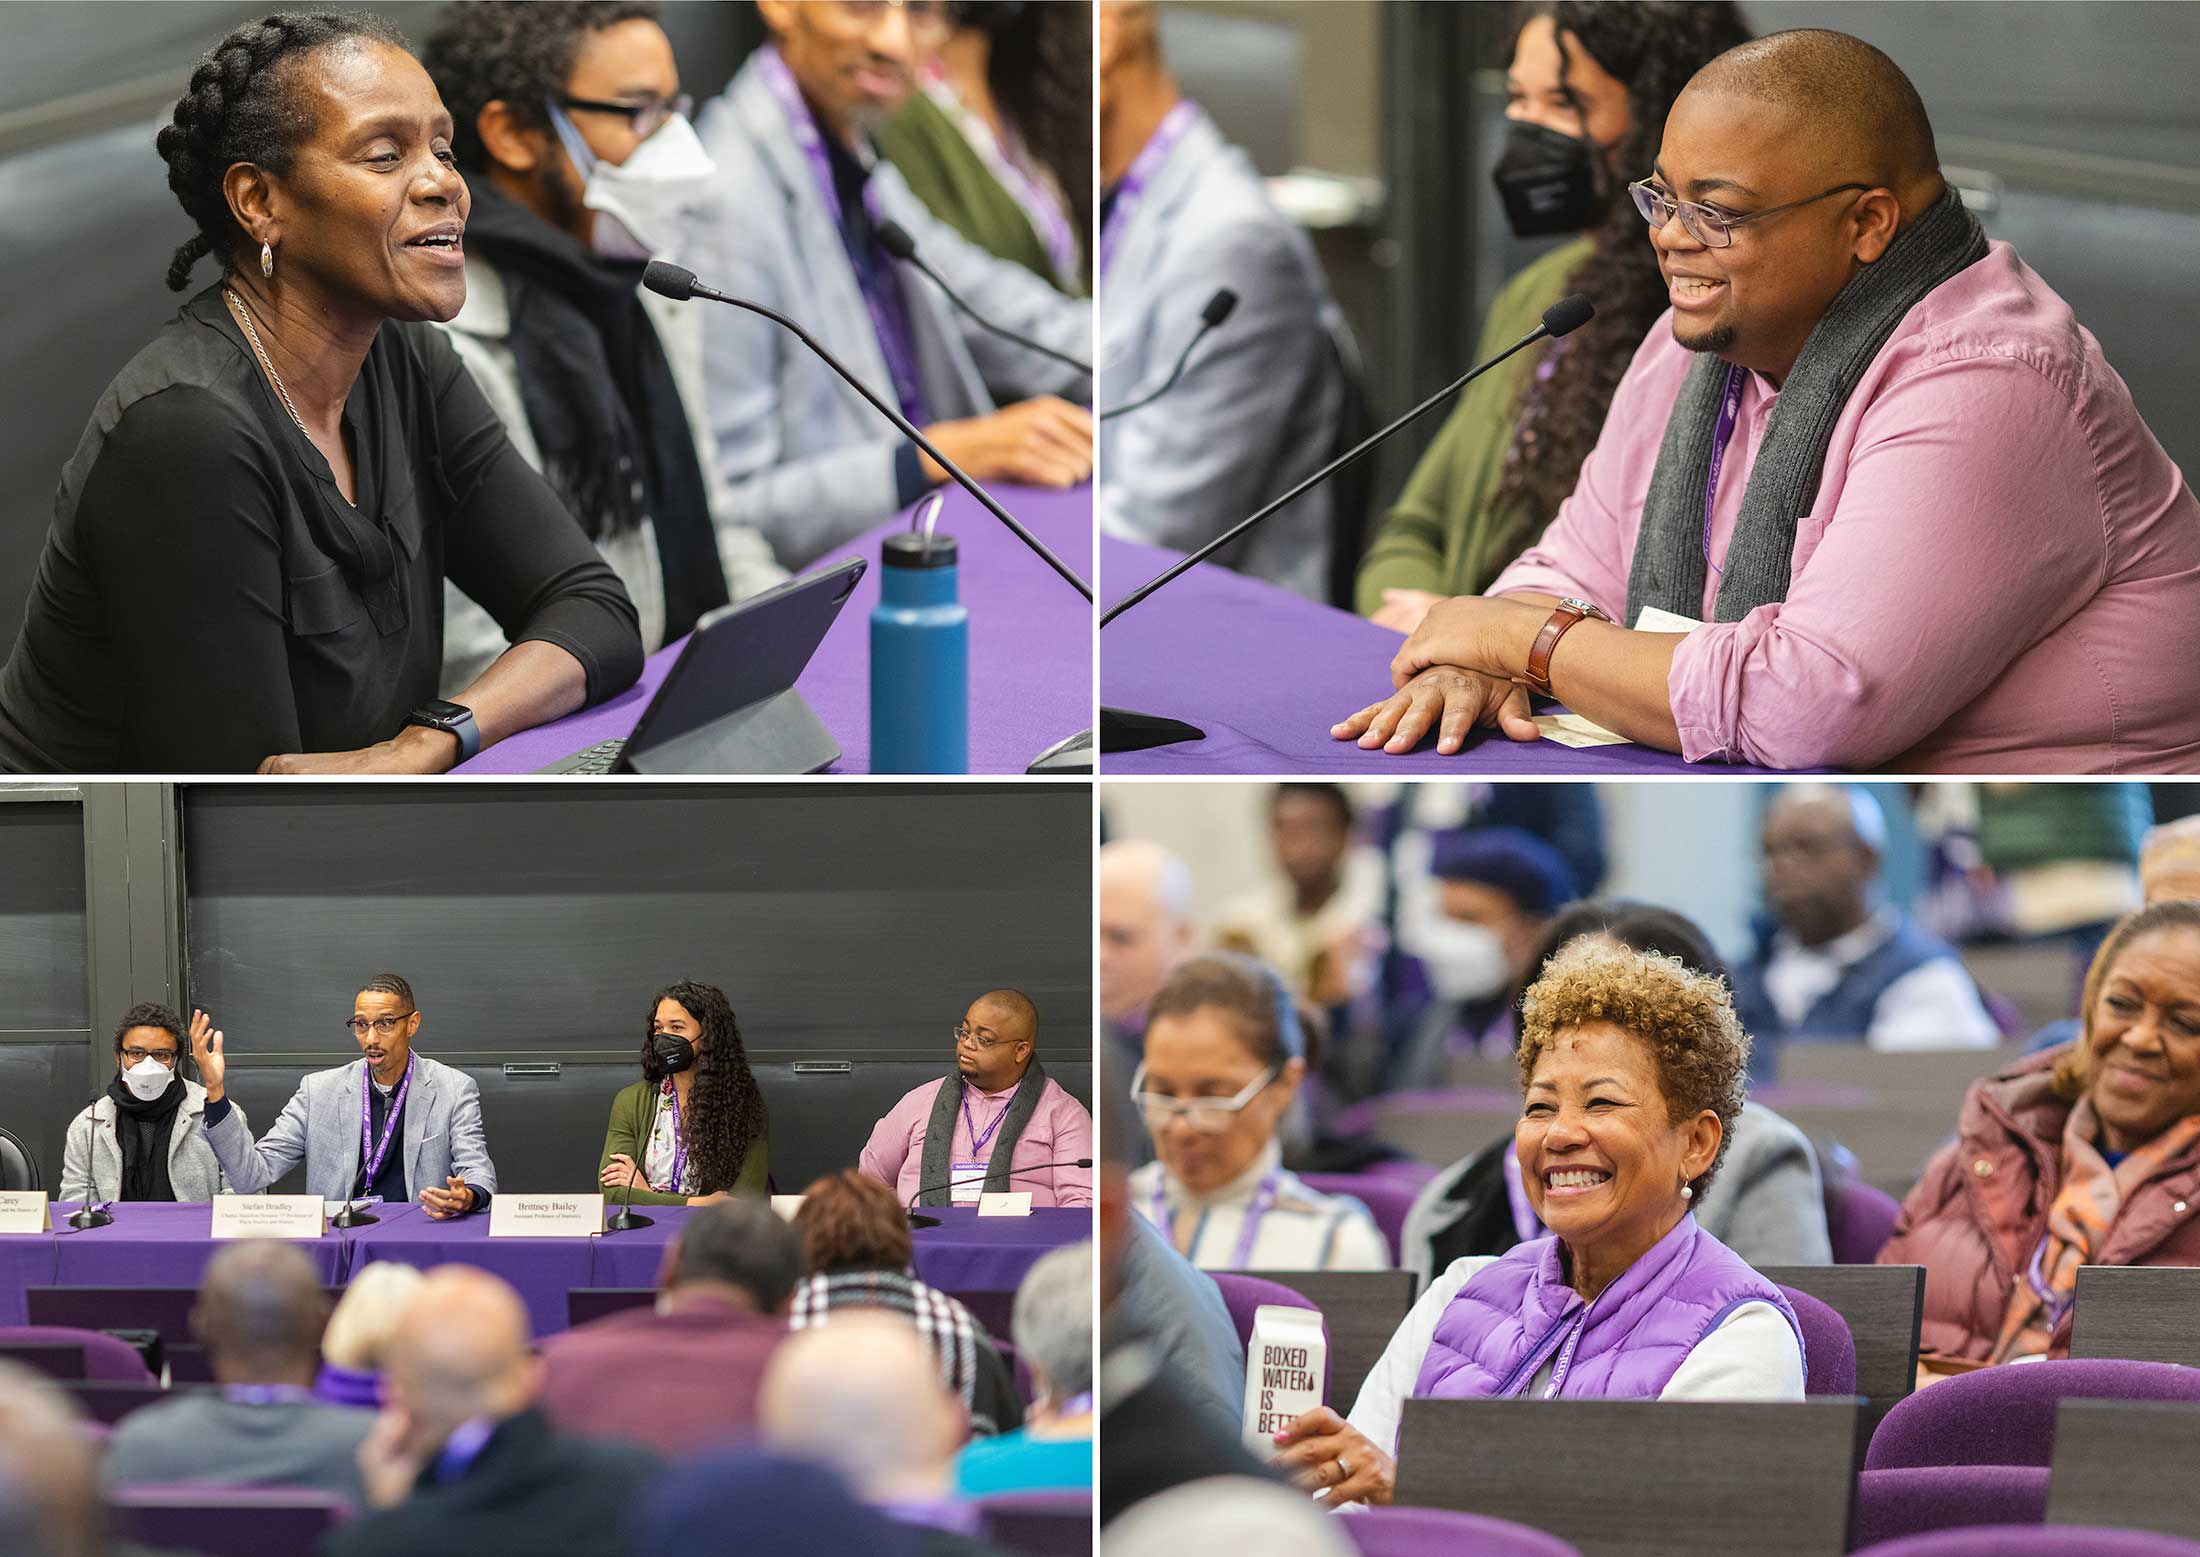 Black faculty speak during the Black Scholars Panel at Amherst College.